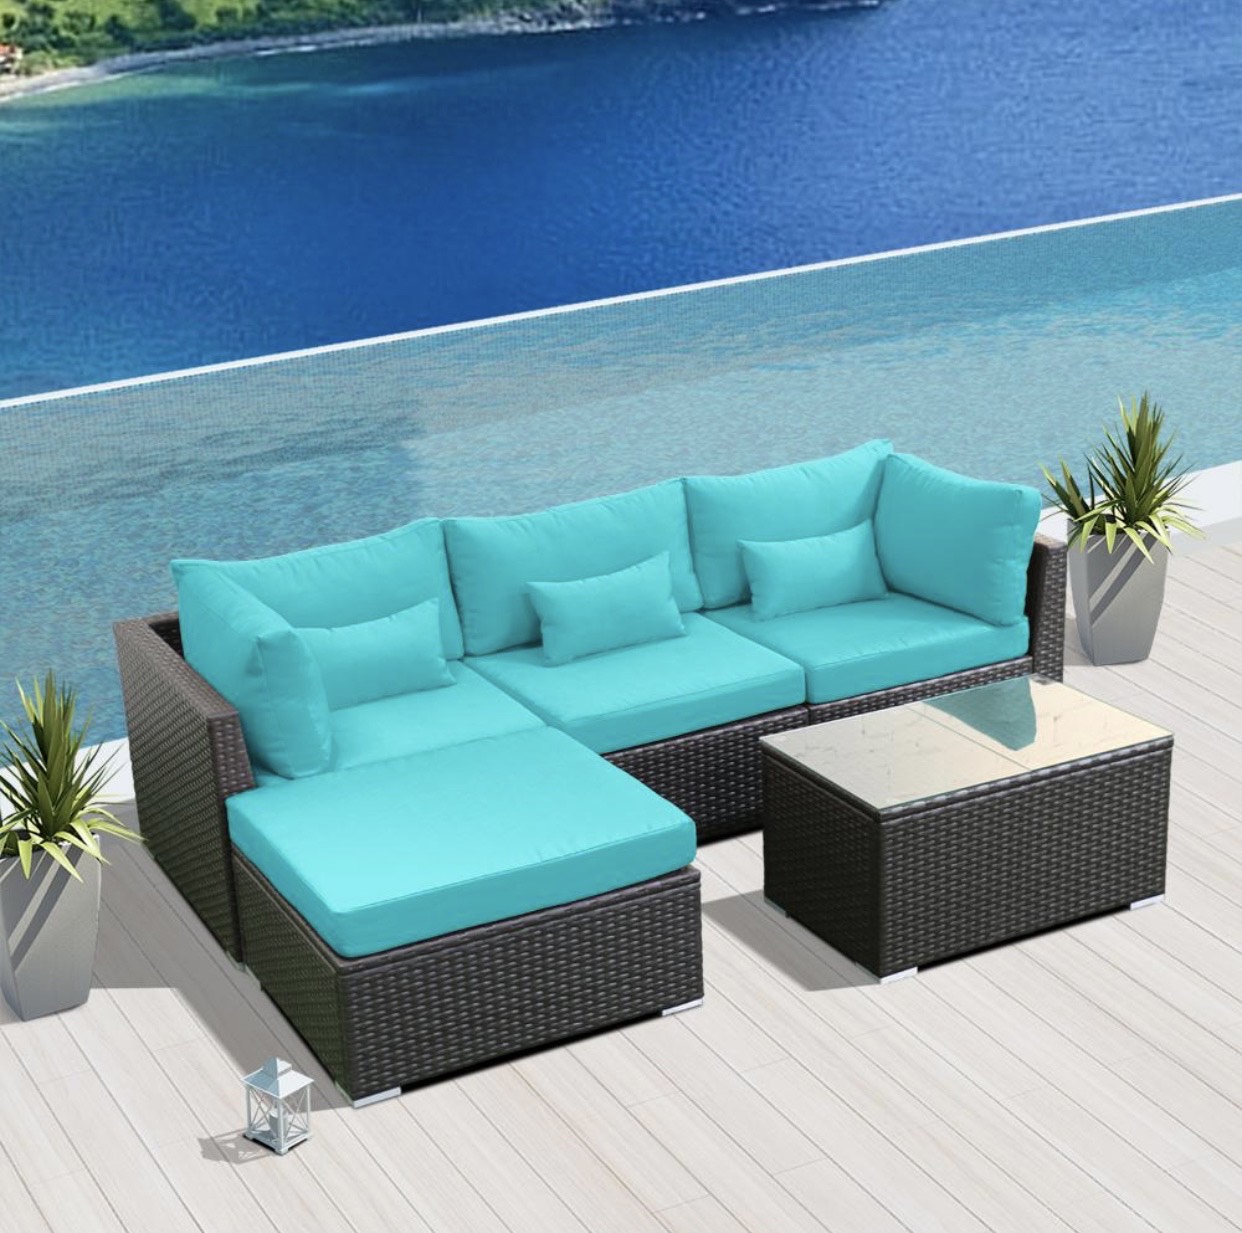 Blue Turquoise 5H Replacement Cushion Covers Set (Without Foam Insis)